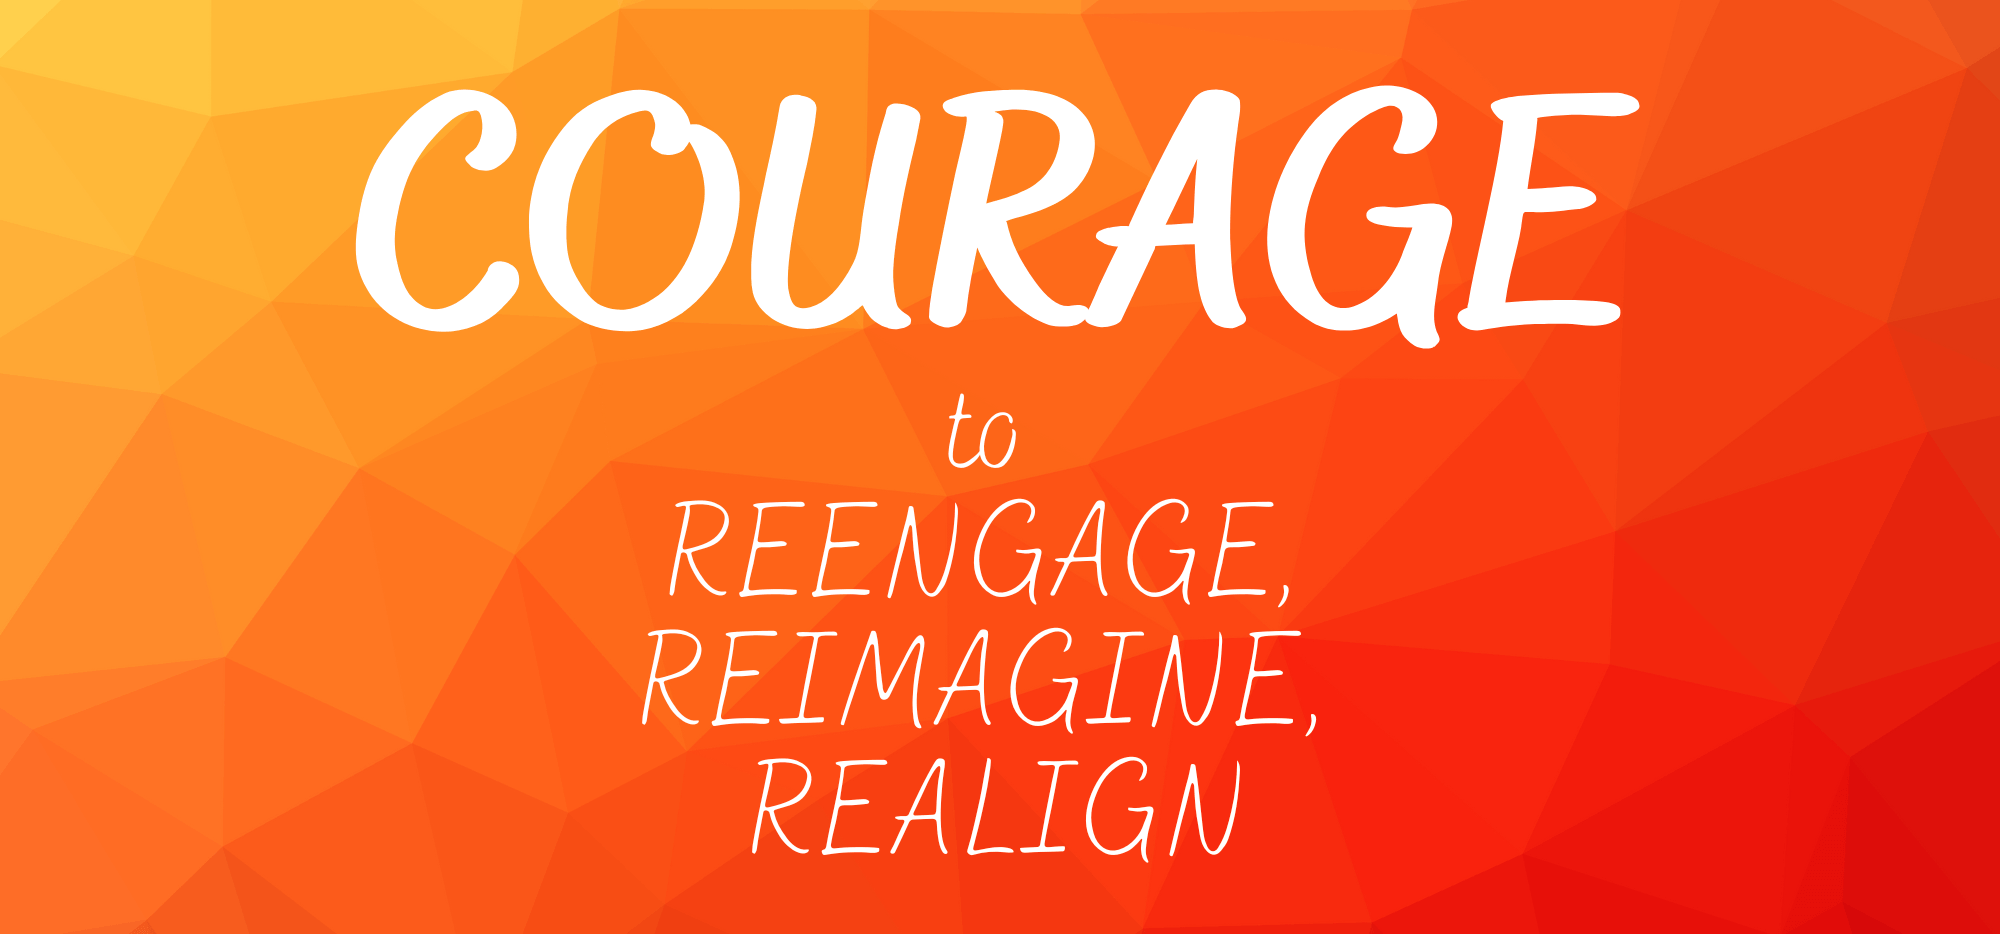 Courage to reengage reimagine and realign